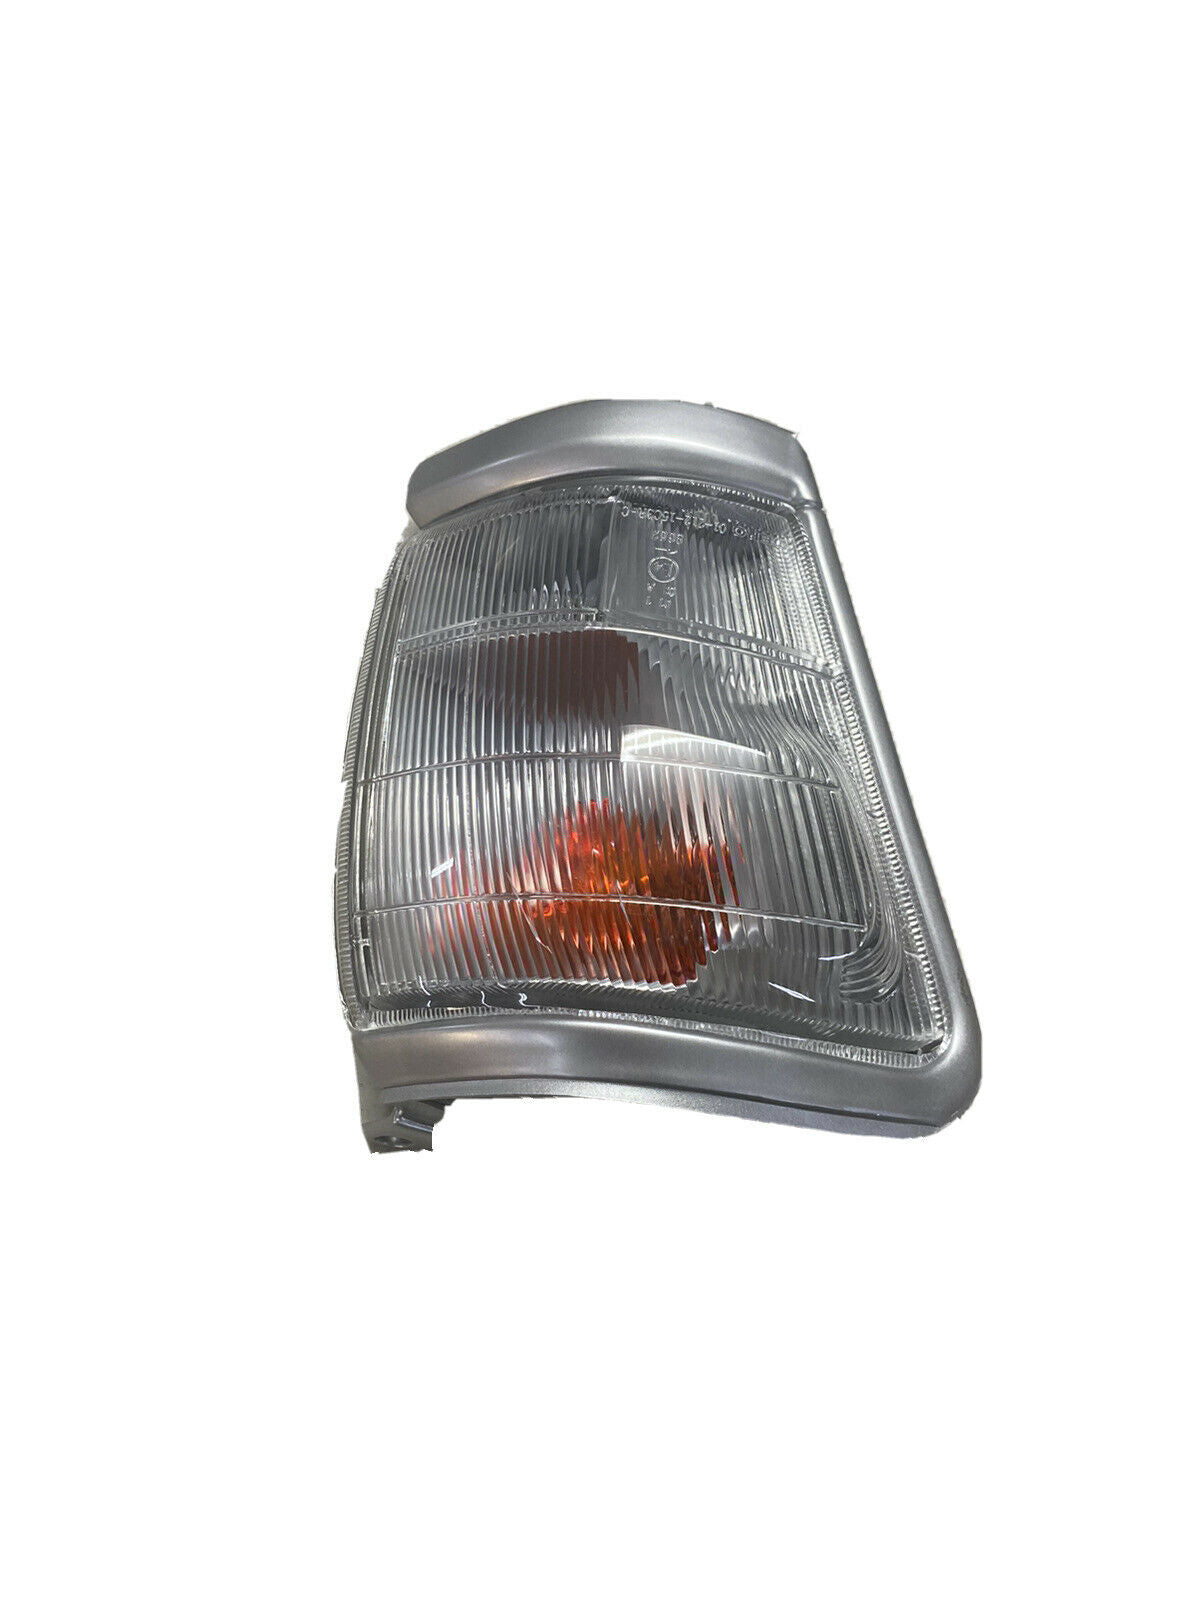 Toyota Hilux 1999-2001 Indicator Light Right Hand - All AutomotiveParts